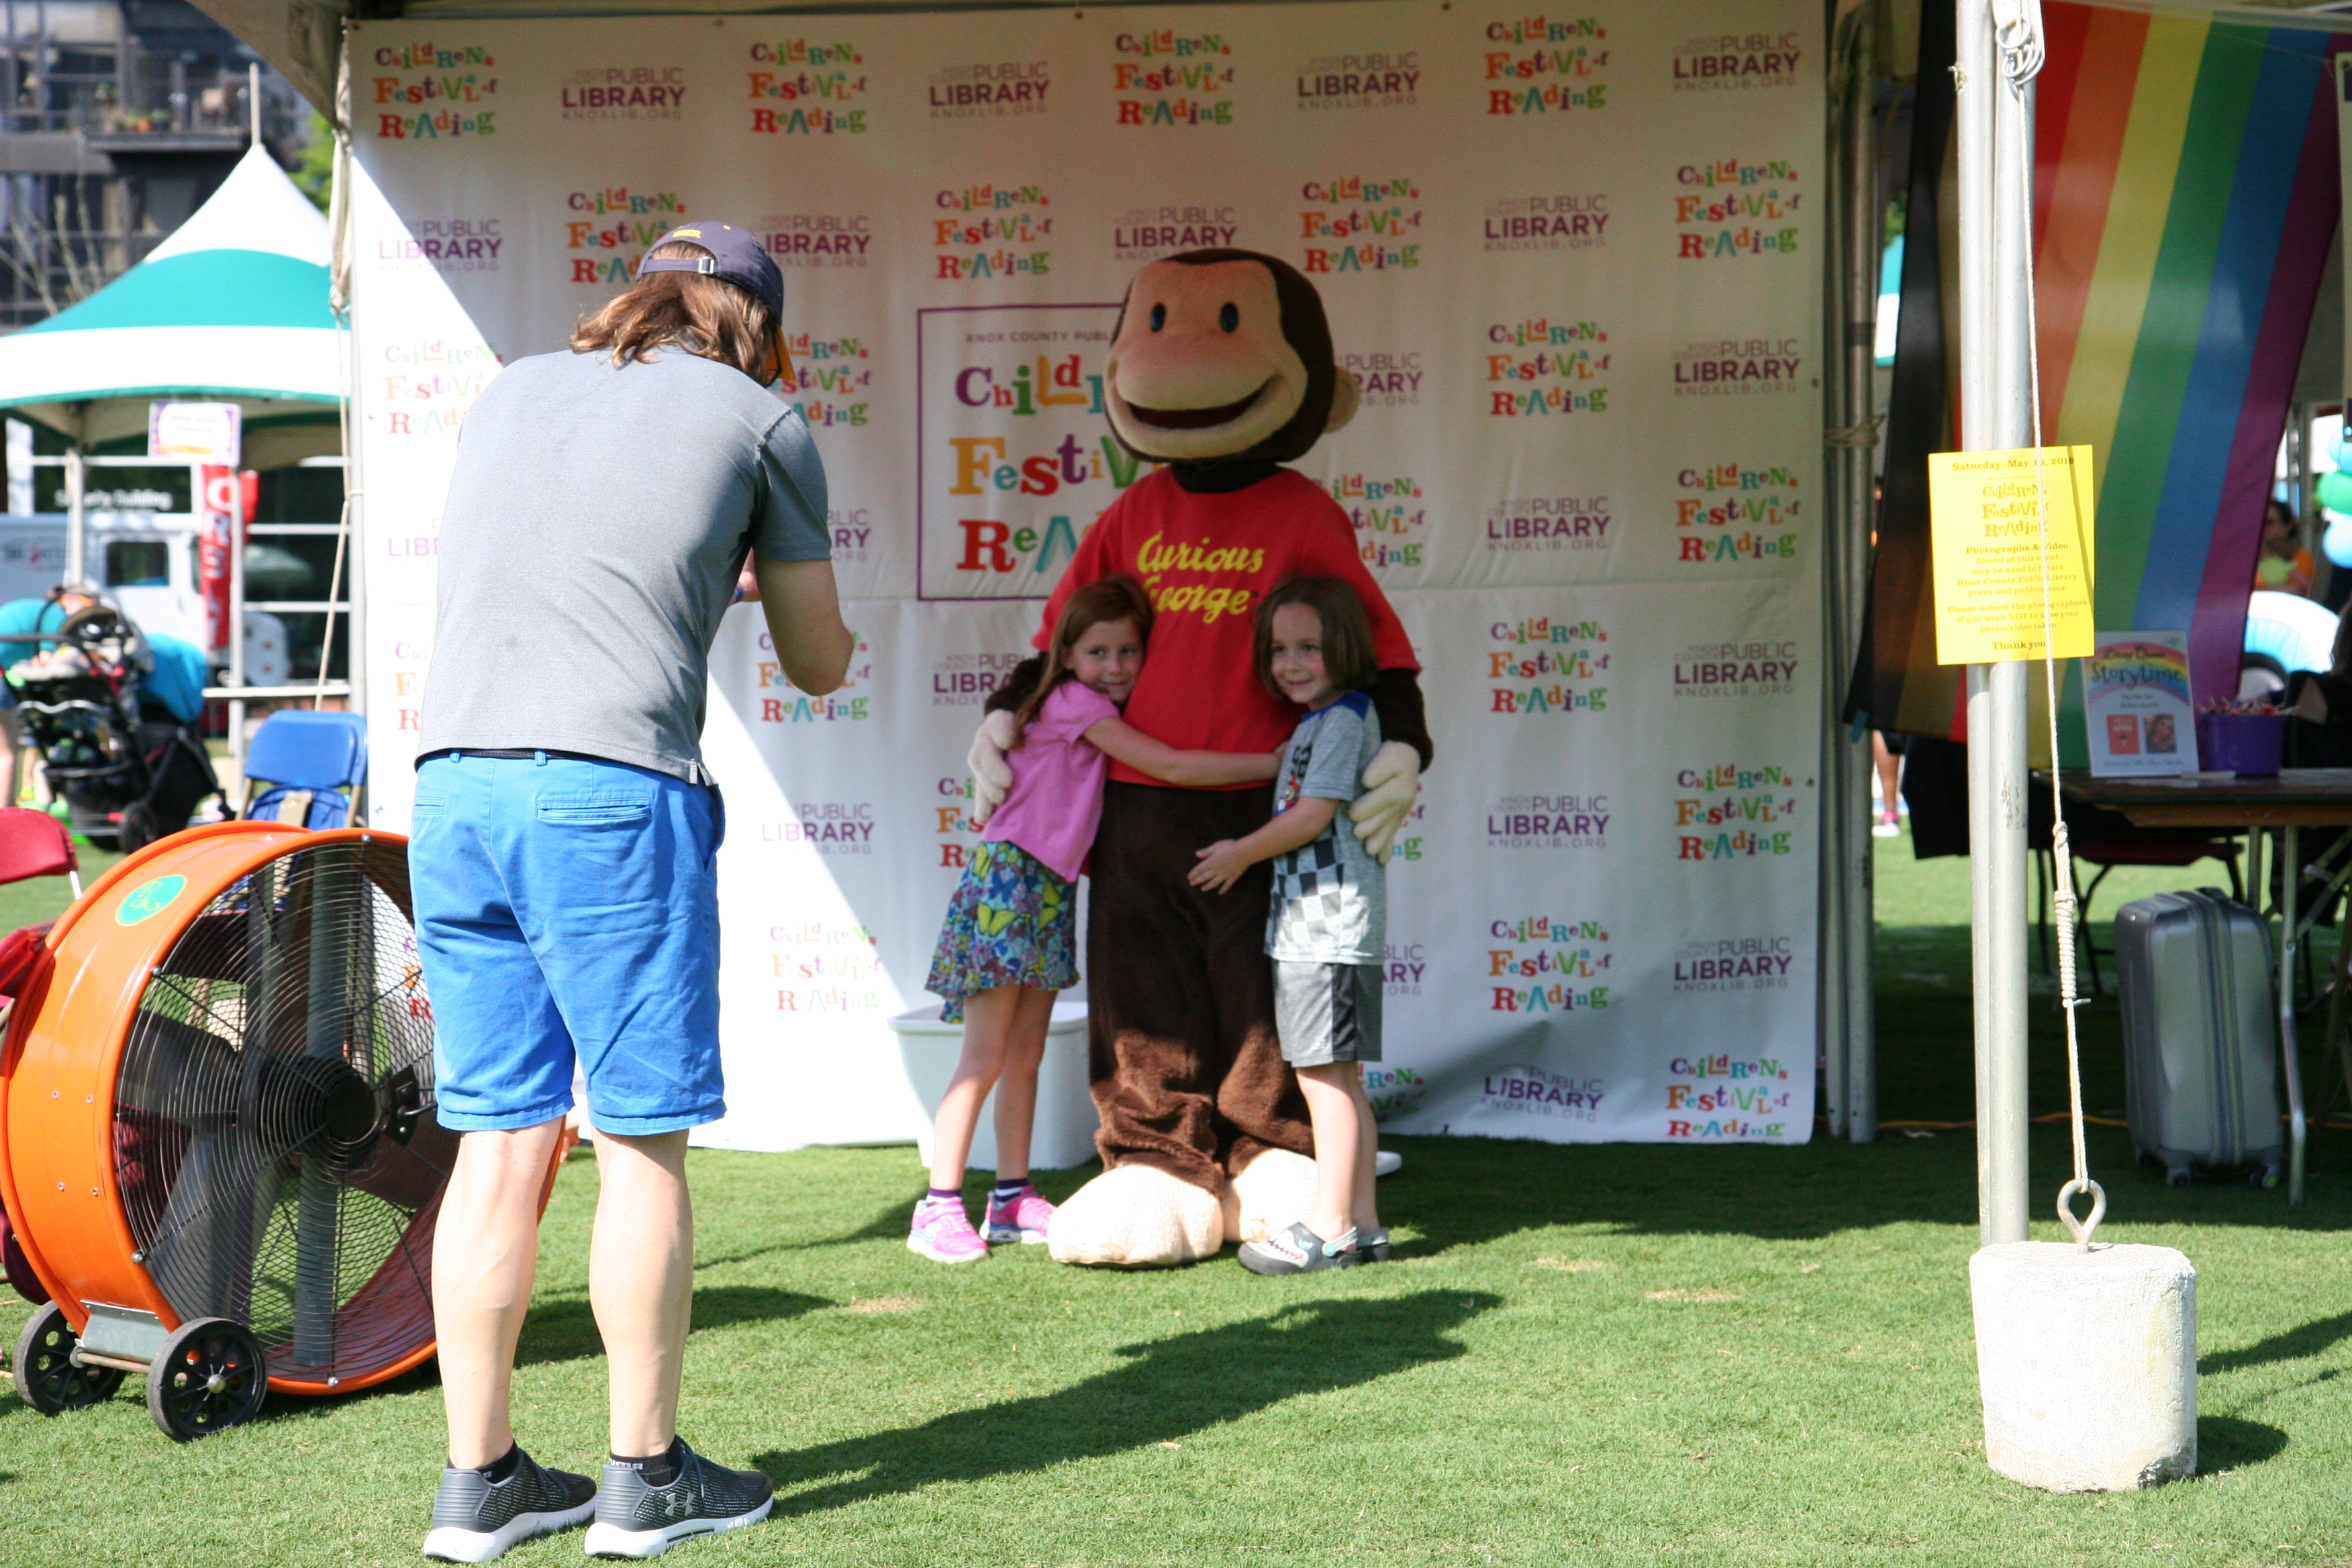 Curious George posing with kids